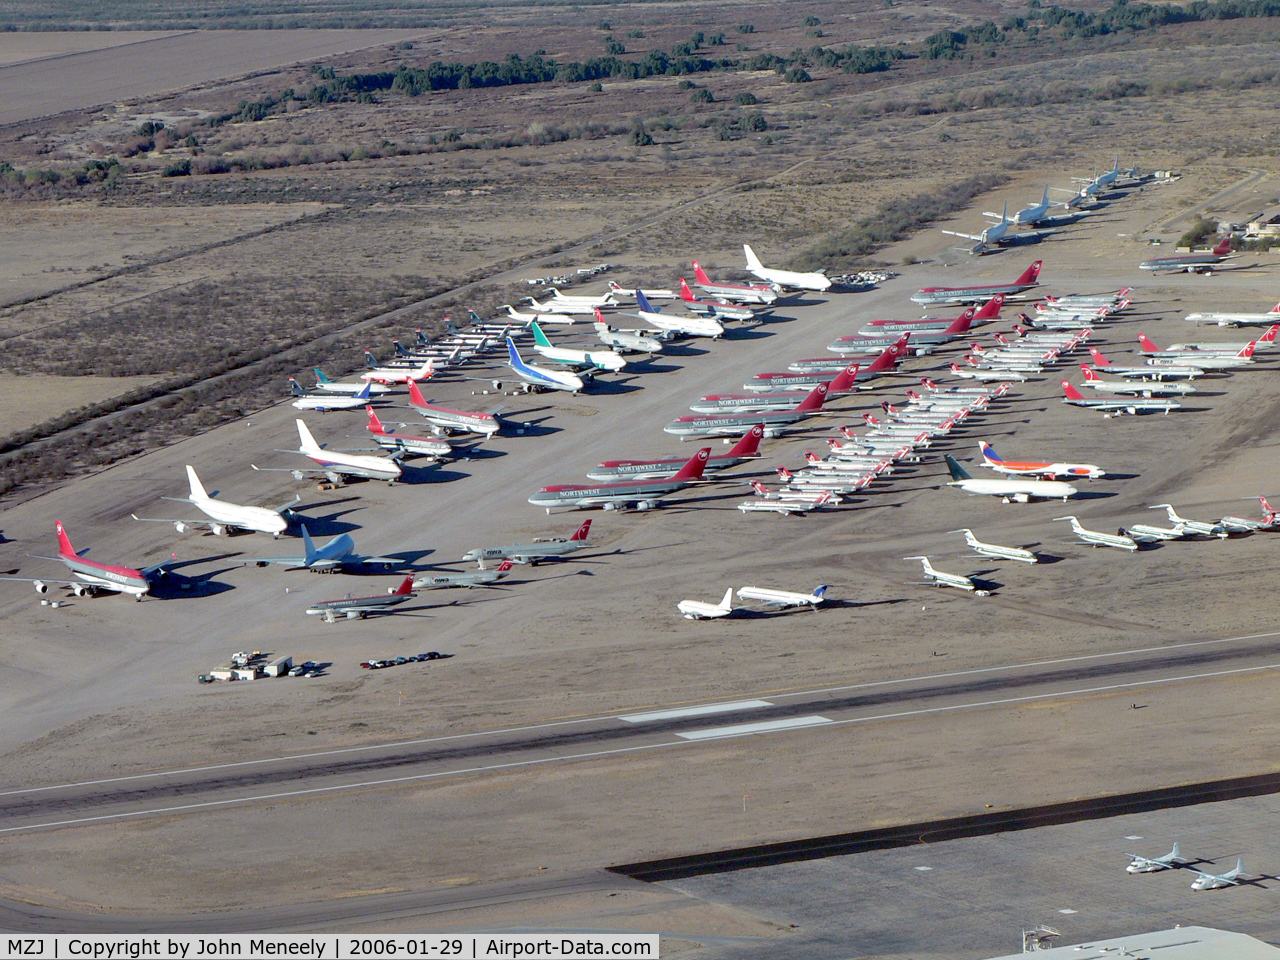 Pinal Airpark Airport (MZJ) - Some of the many airliners stored at MZJ